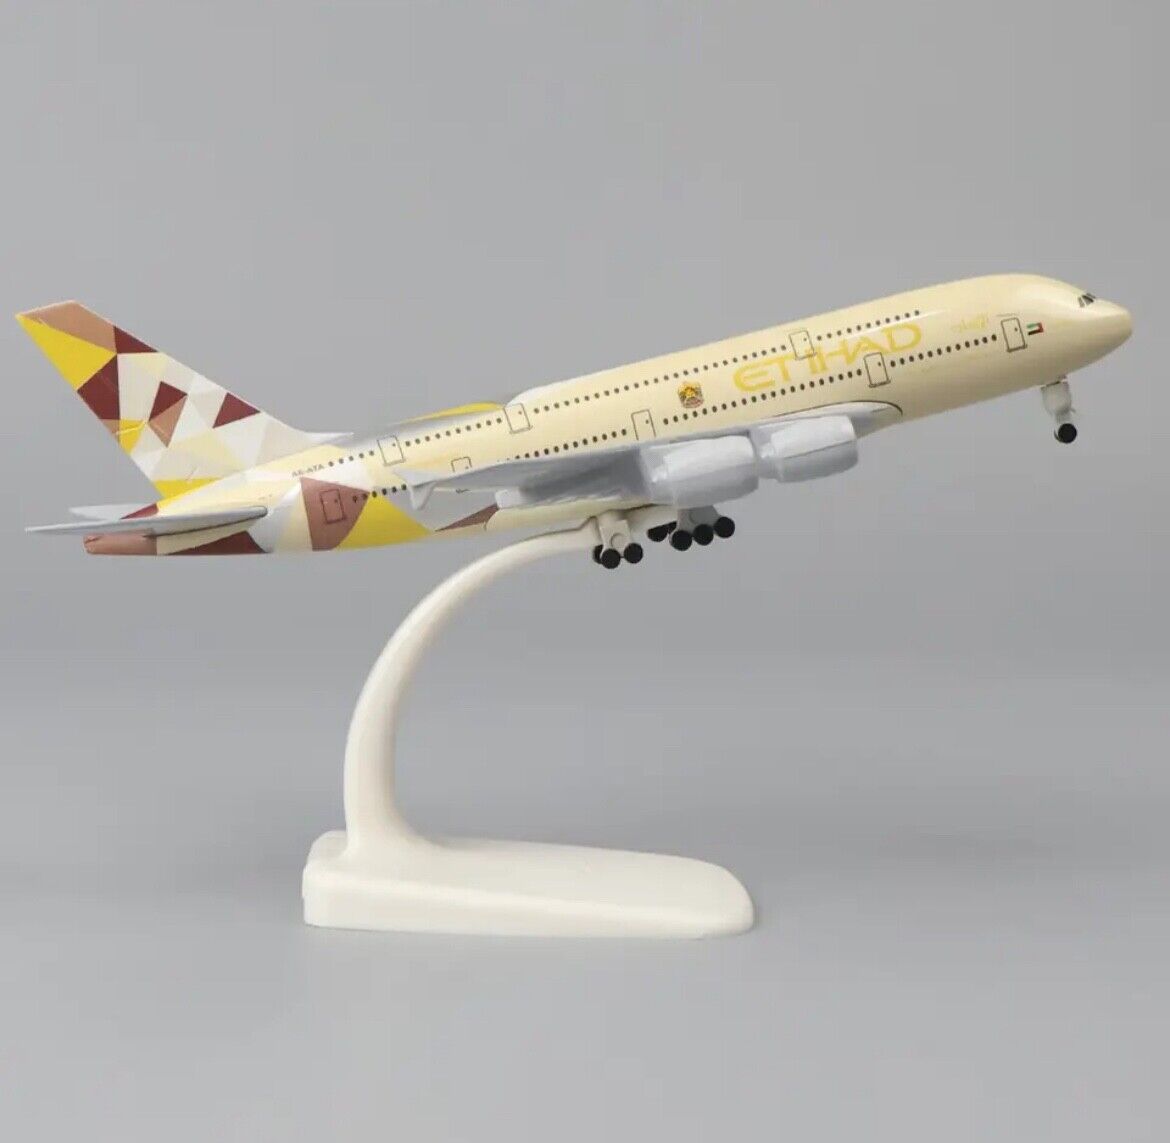 1/400 Scale Airplane Model - Etihad Airlines Airbus A380 Airplane Model